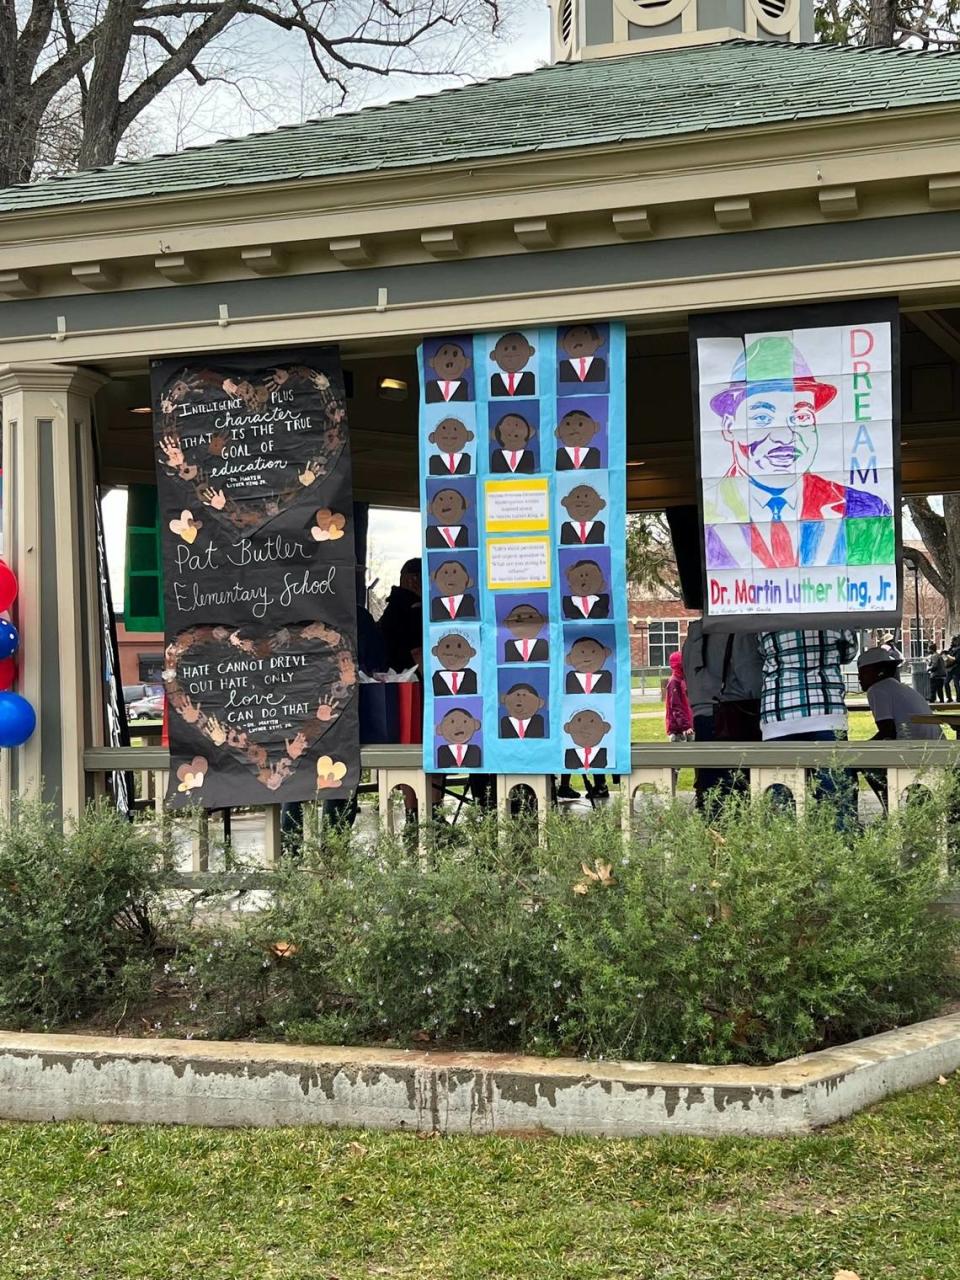 Art created by Paso Robles schoolchildren hangs in the gazebo at Downtown City Park on Martin Luther King Jr. Day on Jan. 17, 2022.